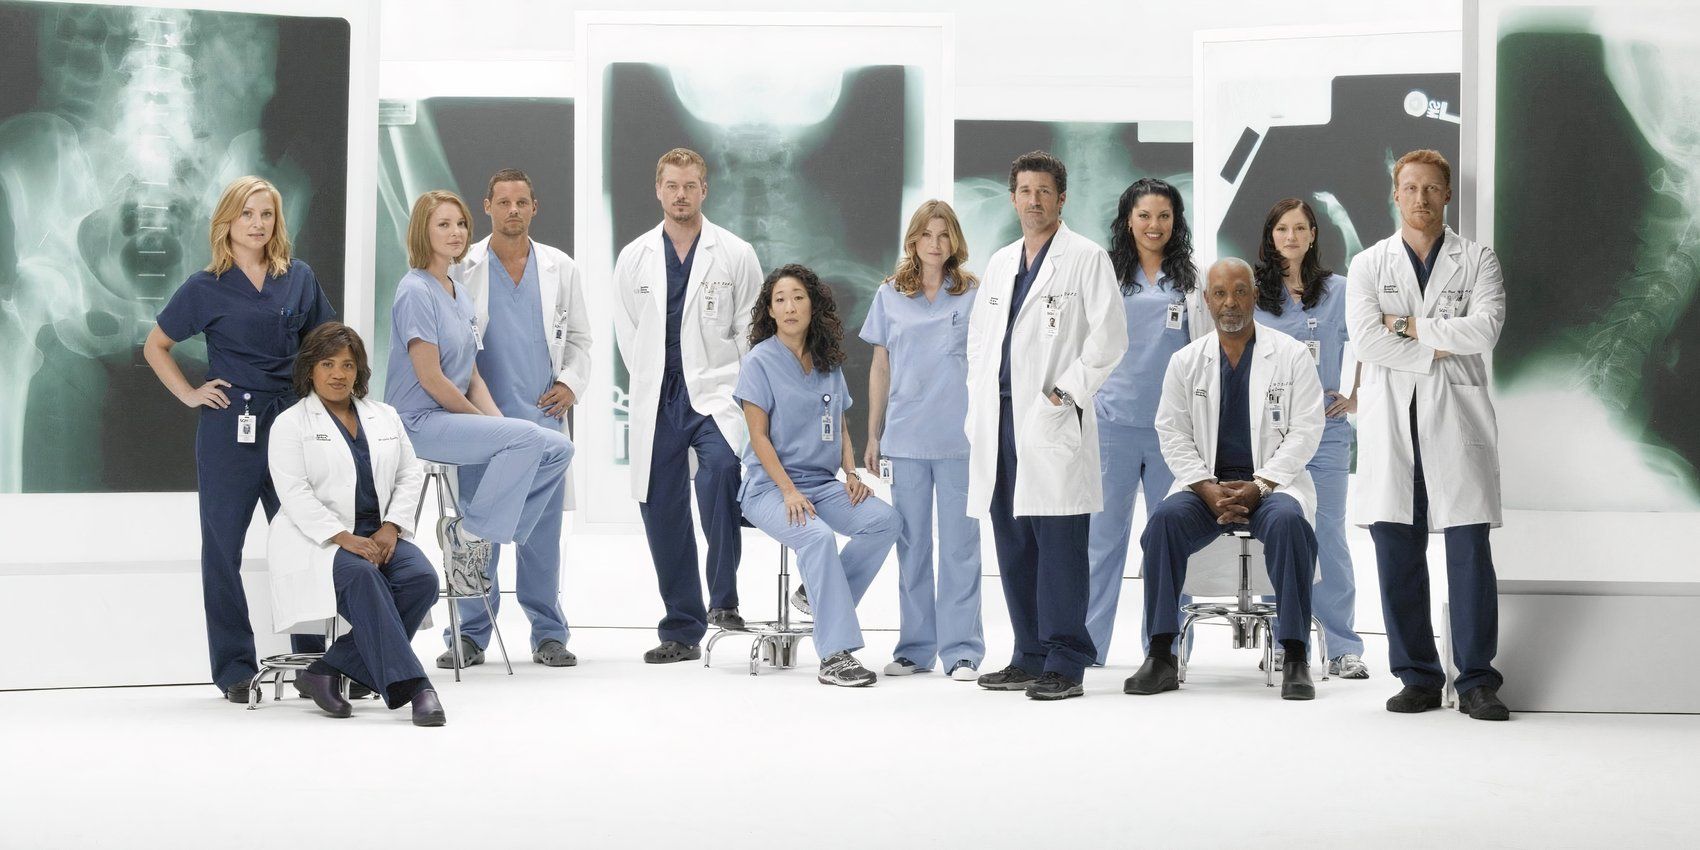 Former “Grey’s Anatomy” actor explains series exit